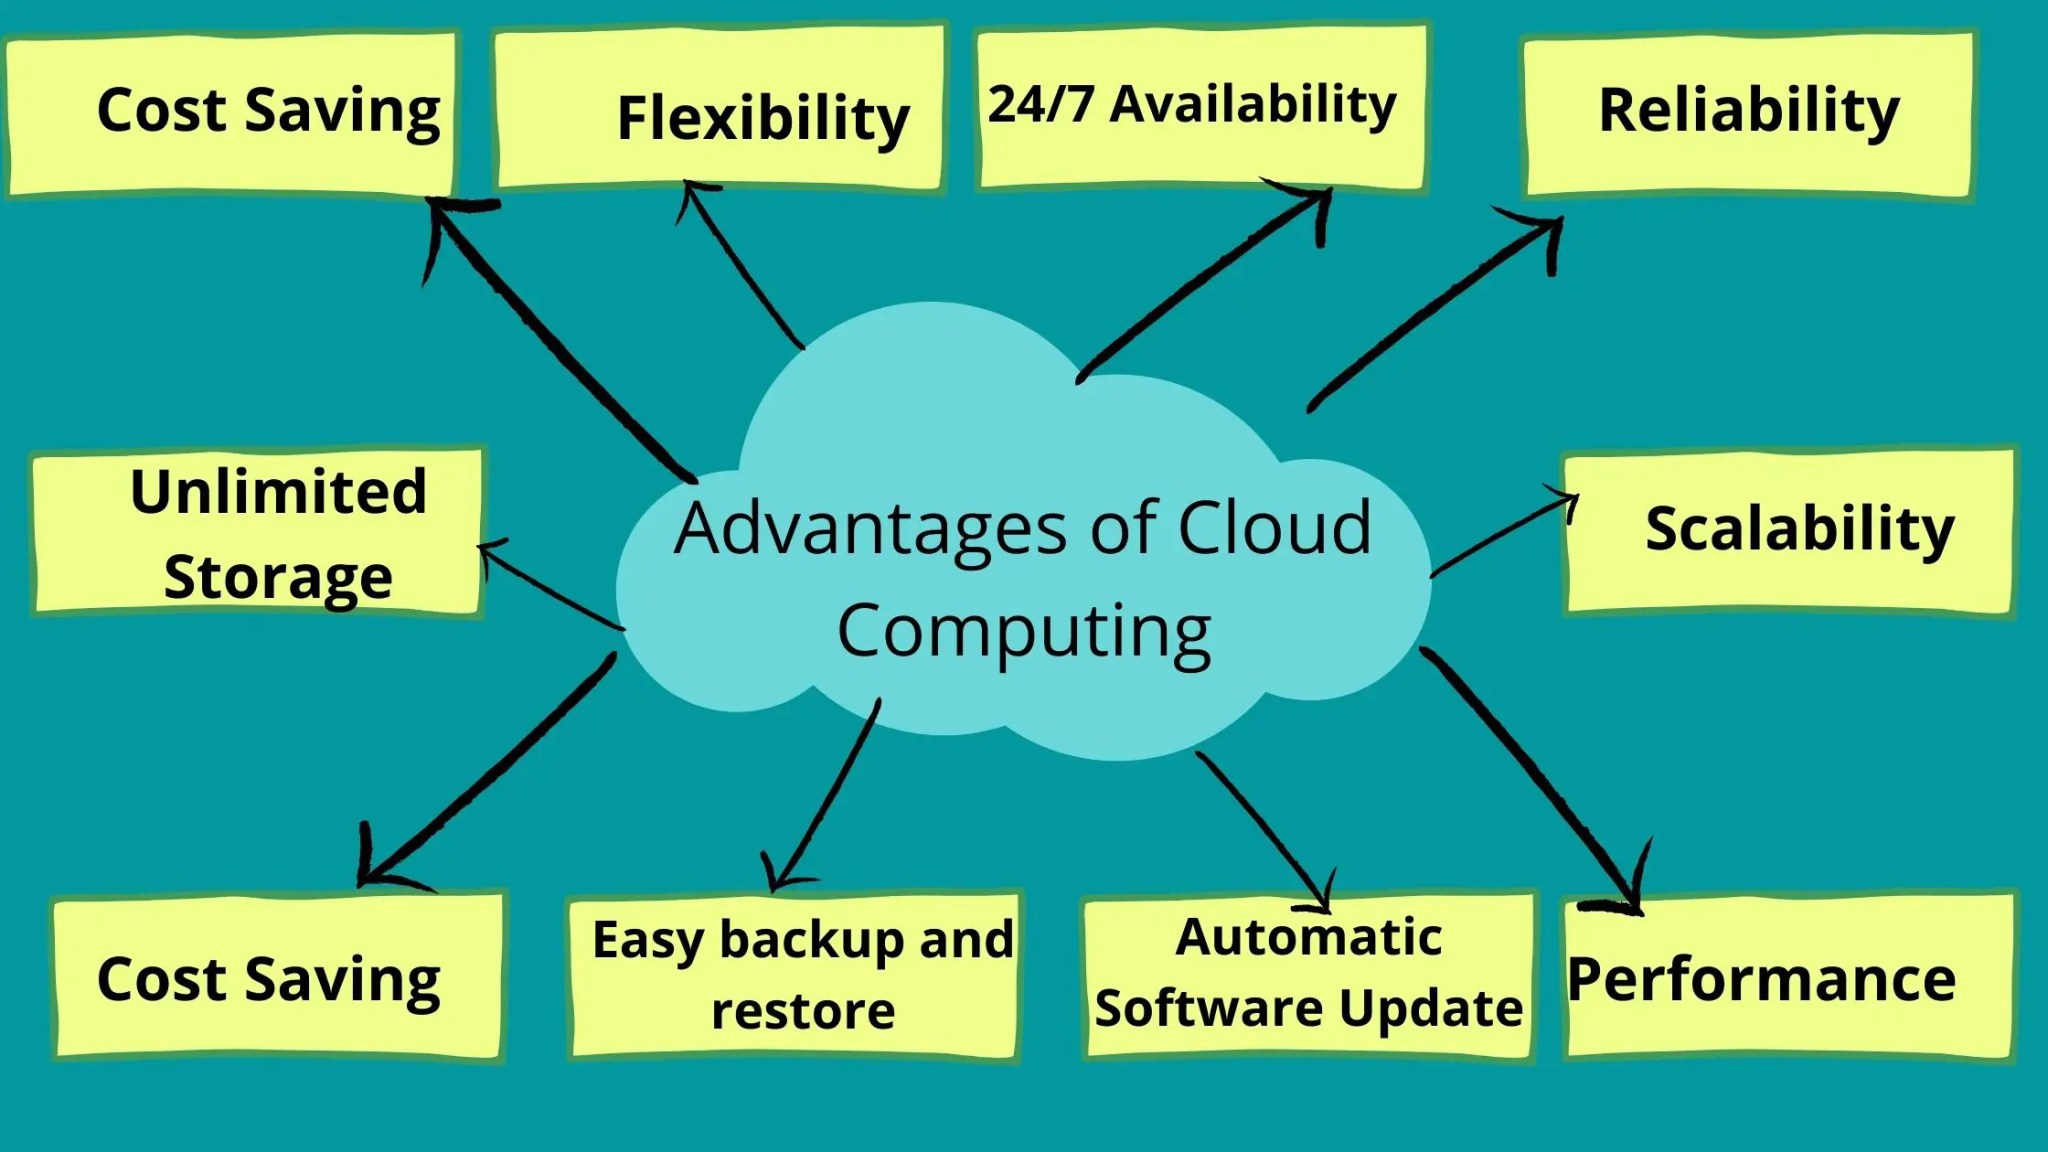 A diagram illustrating the benefits of cloud service interoperability including cost saving, flexibility, 24/7 availability, reliability, unlimited storage, scalability, easy backup and restore, automatic software update, and performance.